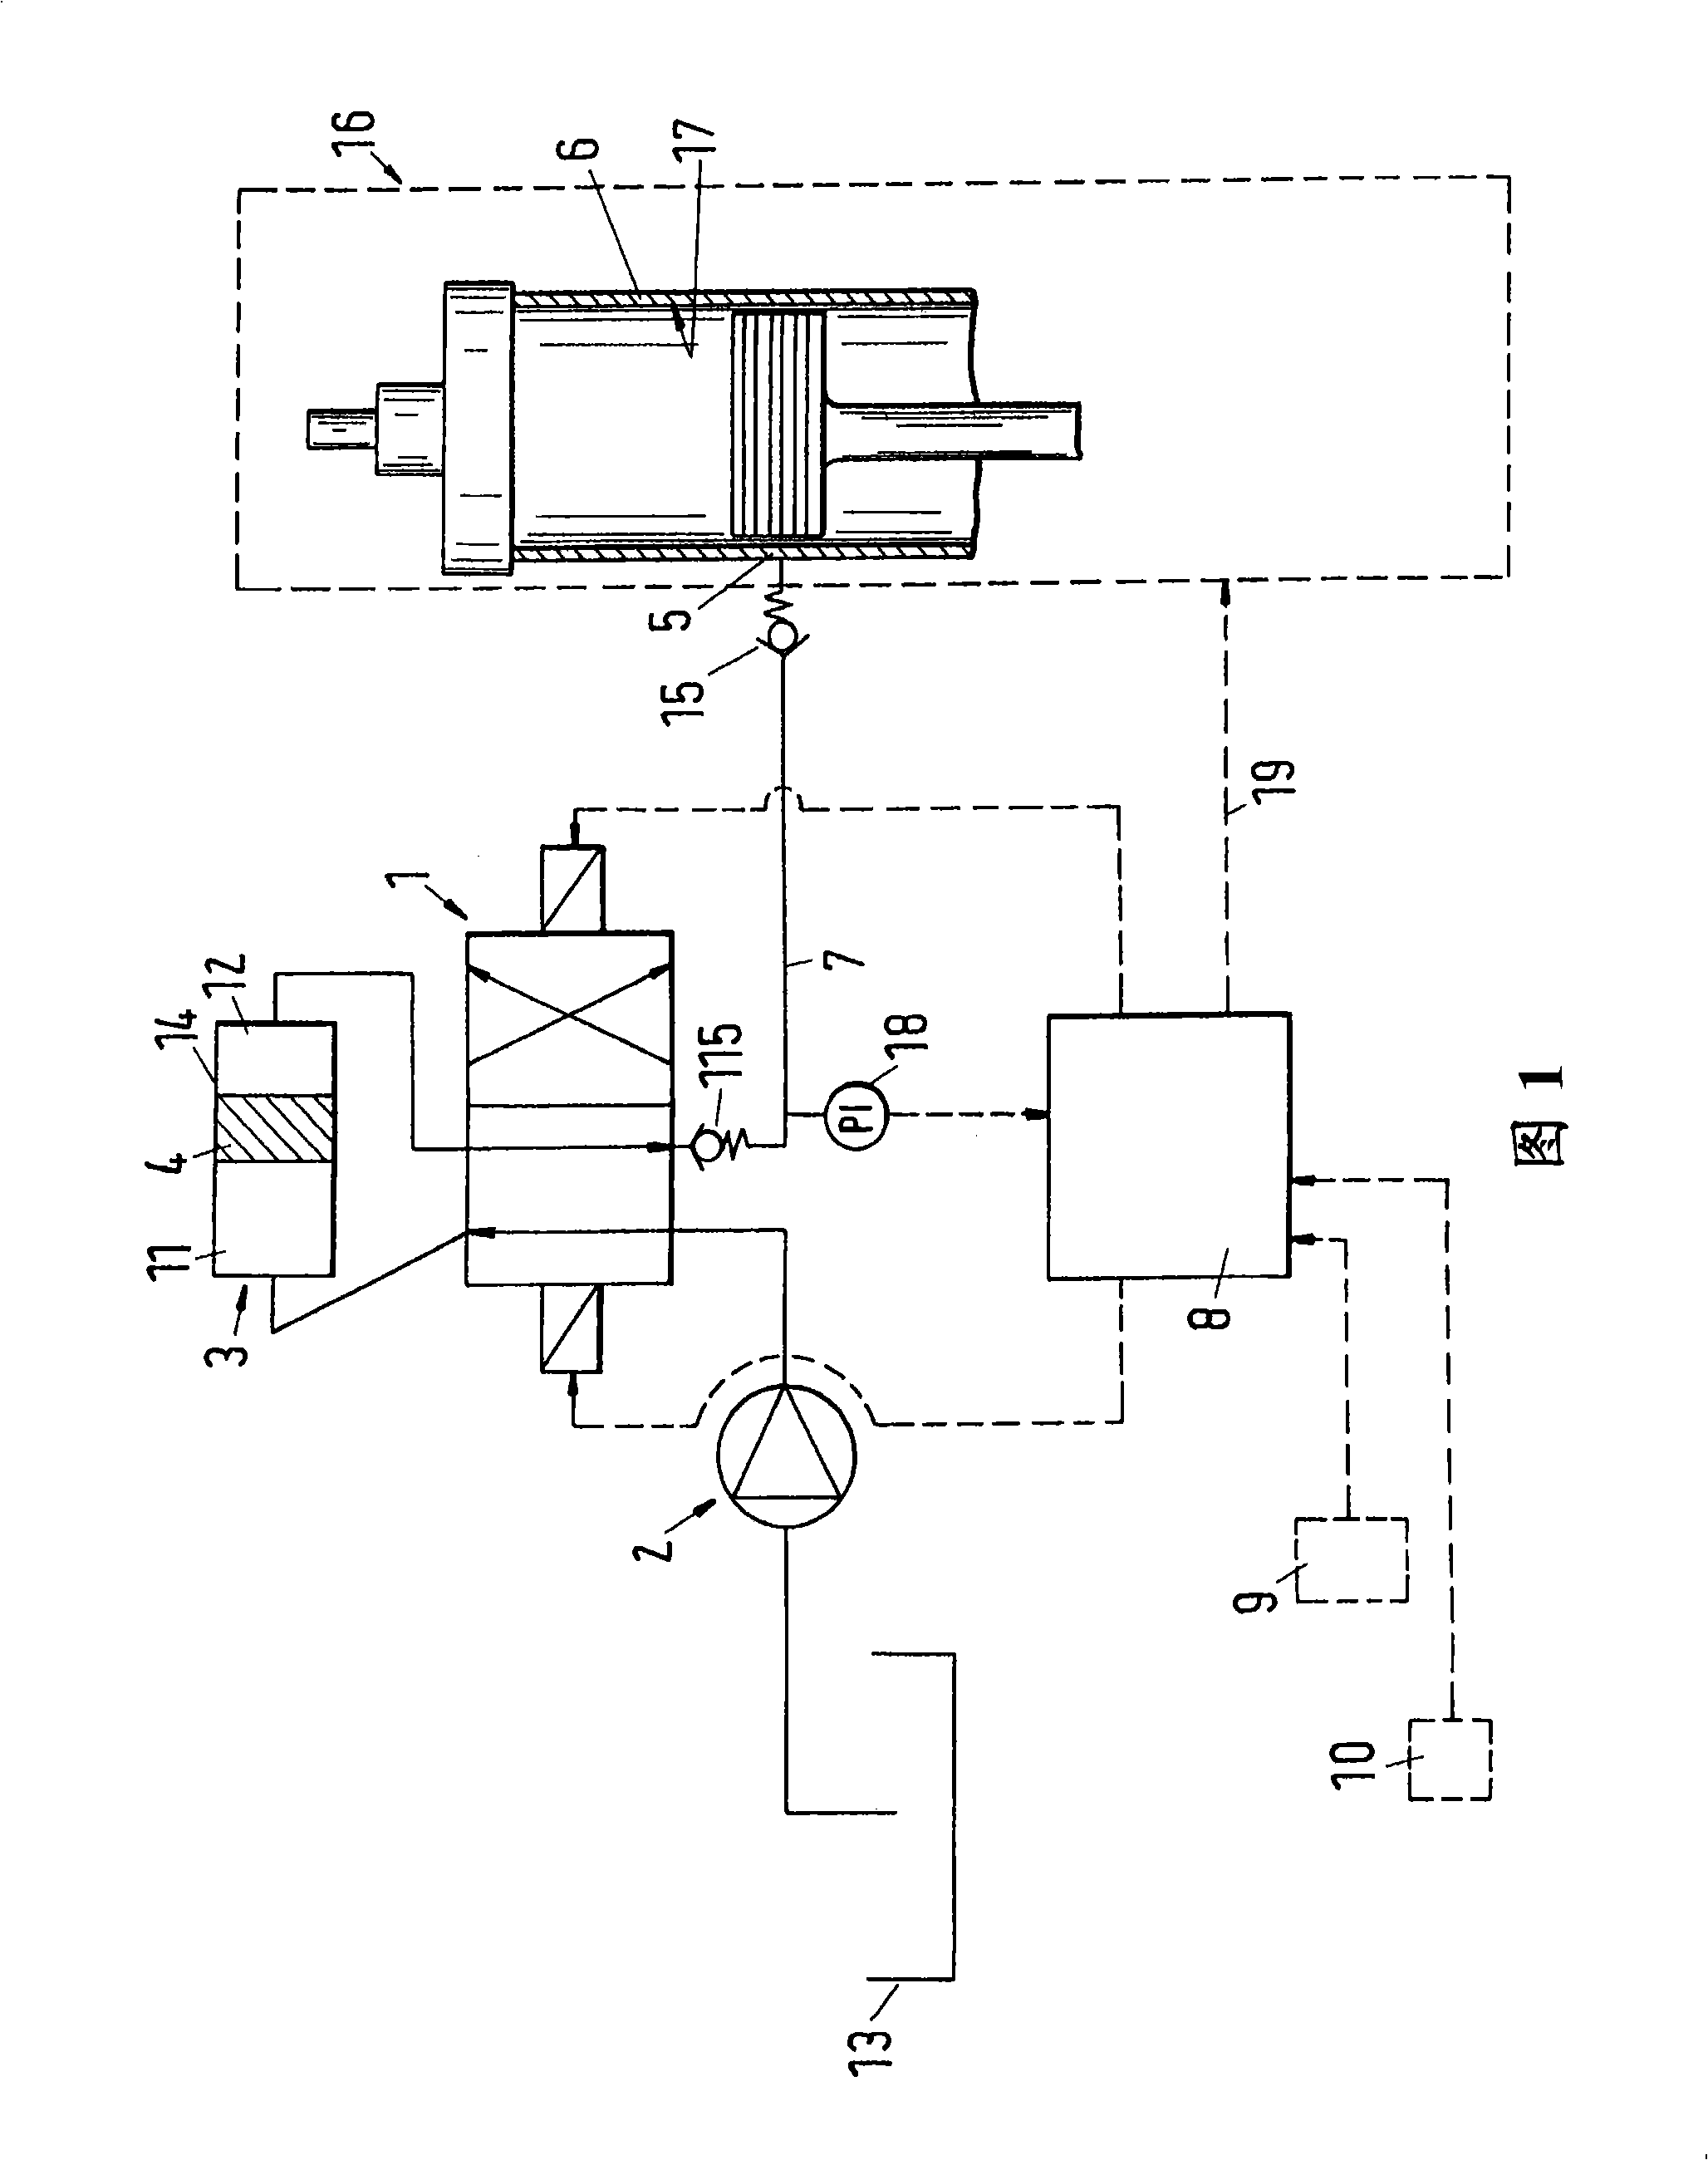 Device for lubricating cylinders